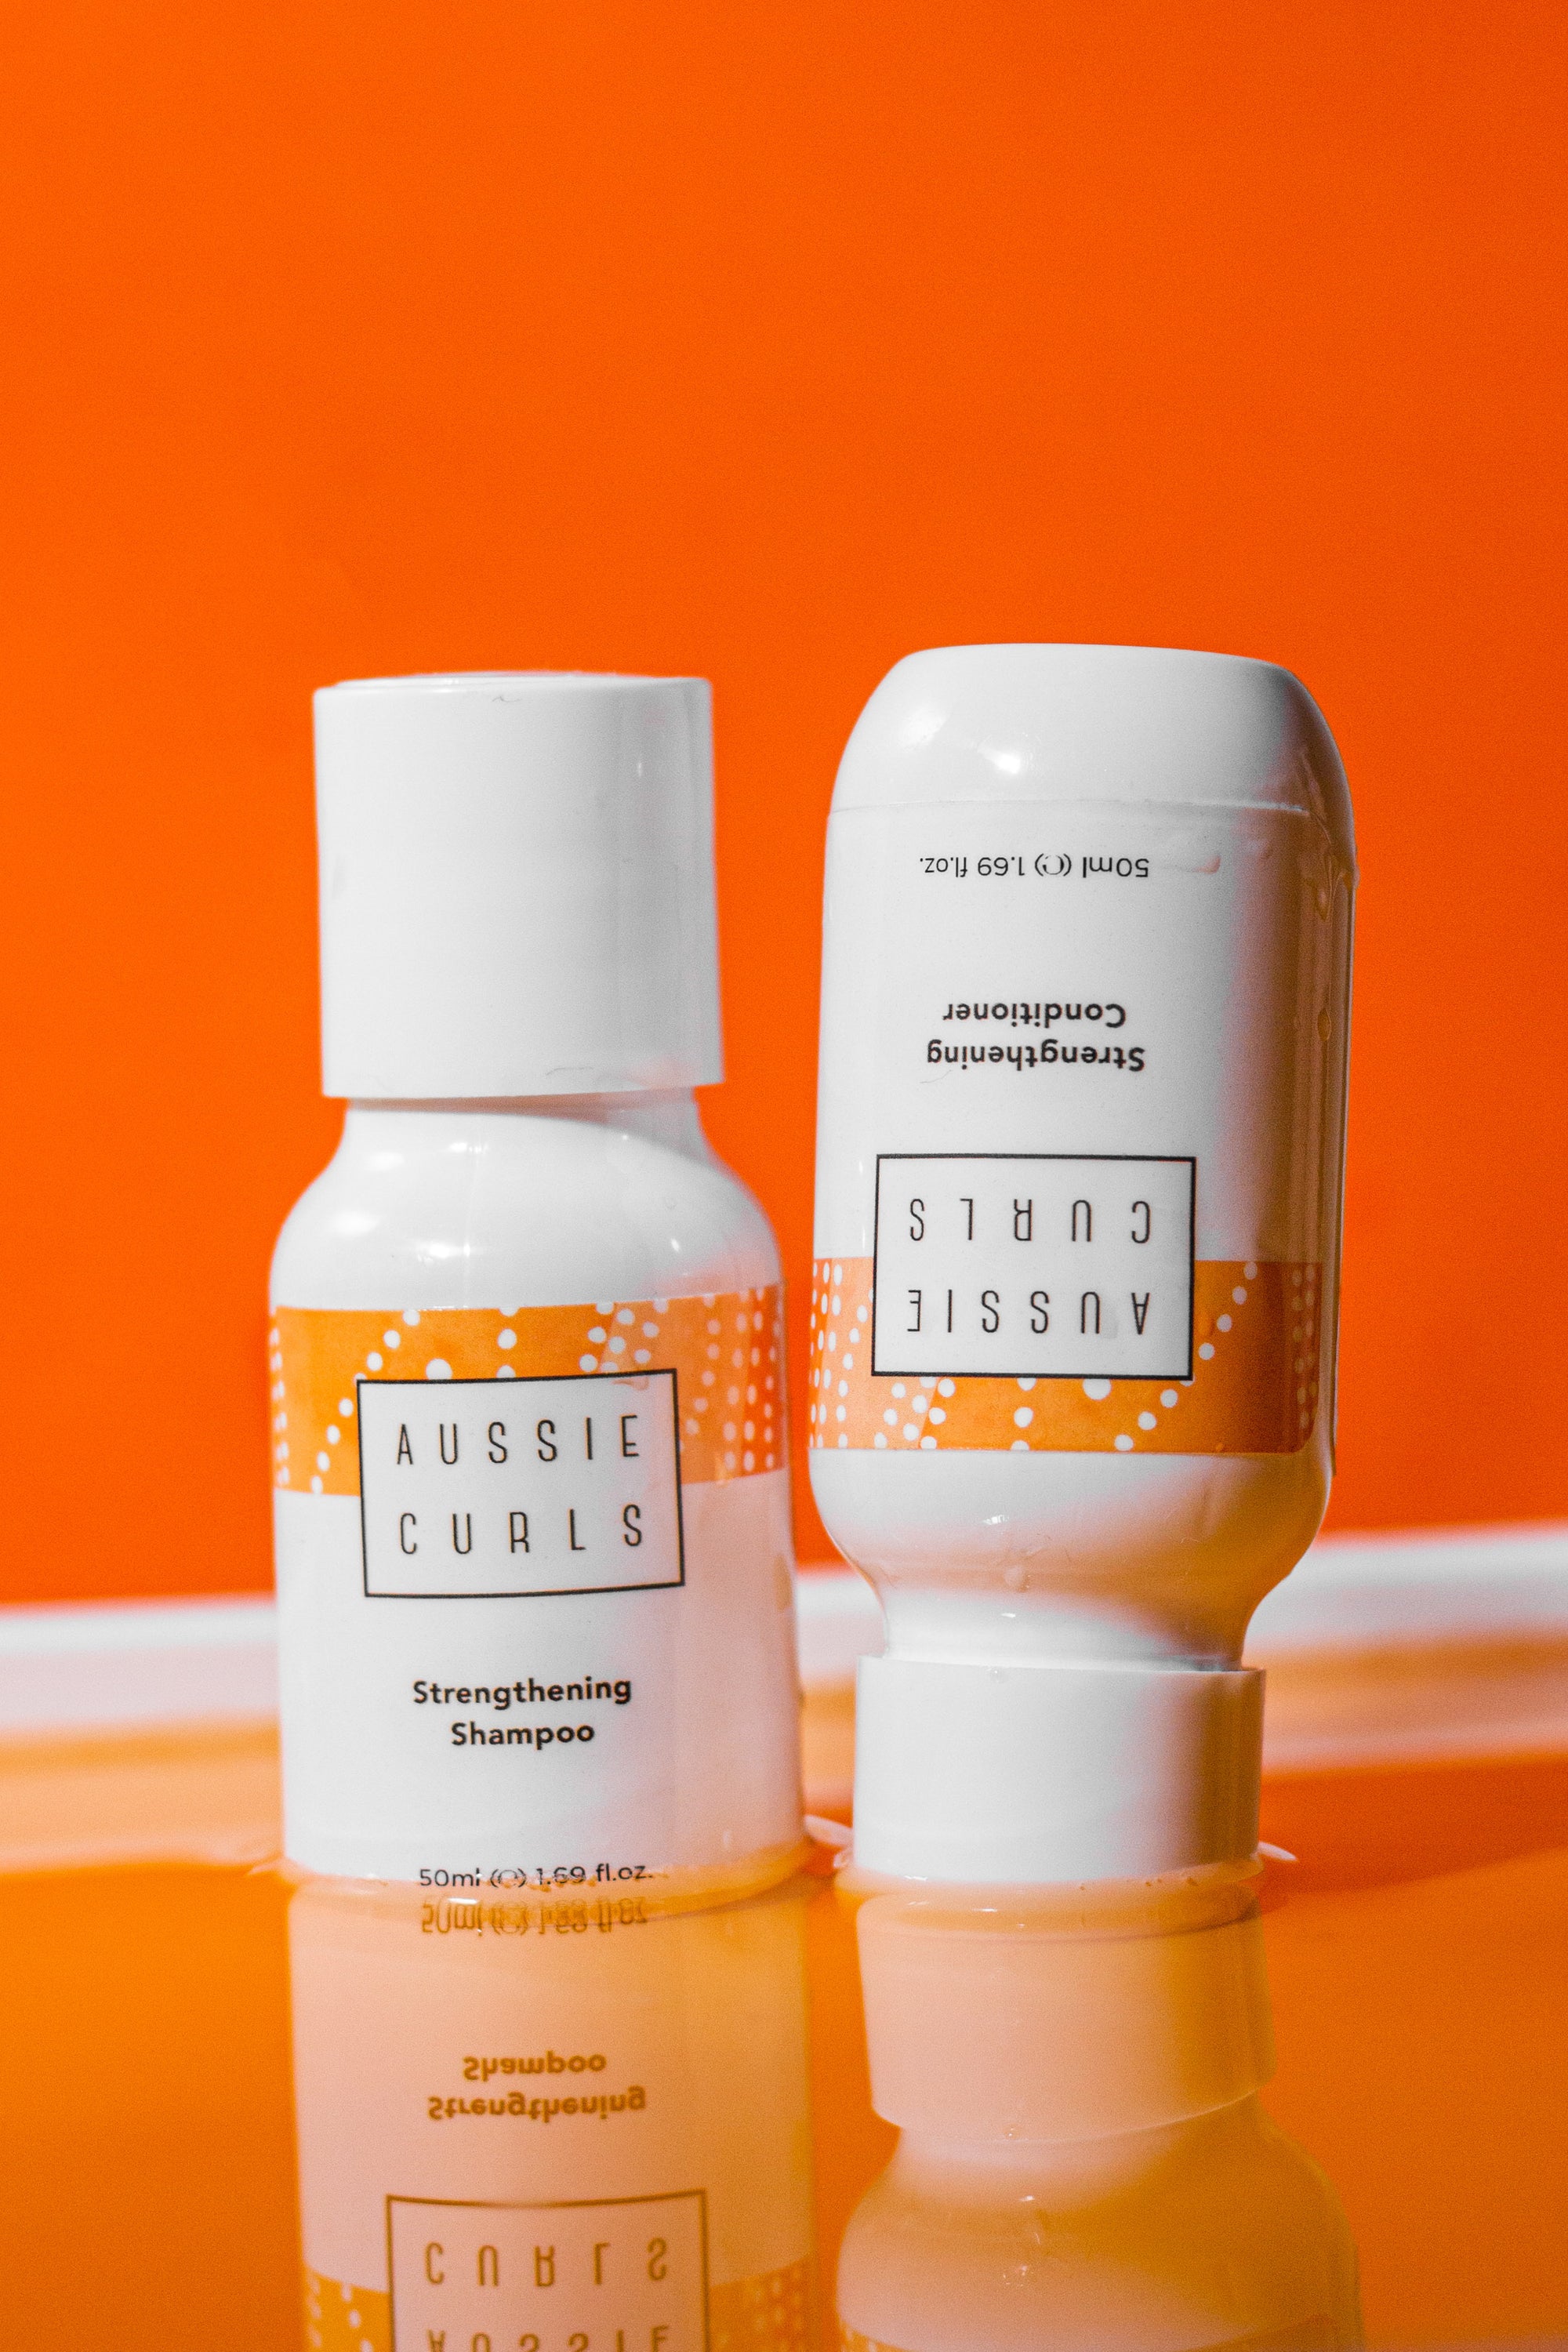 Aussie curls 50ml sample white glossy shampoo bottle with a 50ml sample size white glossy conditoner bottle next to it, the bottles have orange and white indigenous Australian artwork and are on a dark orange and yellow background